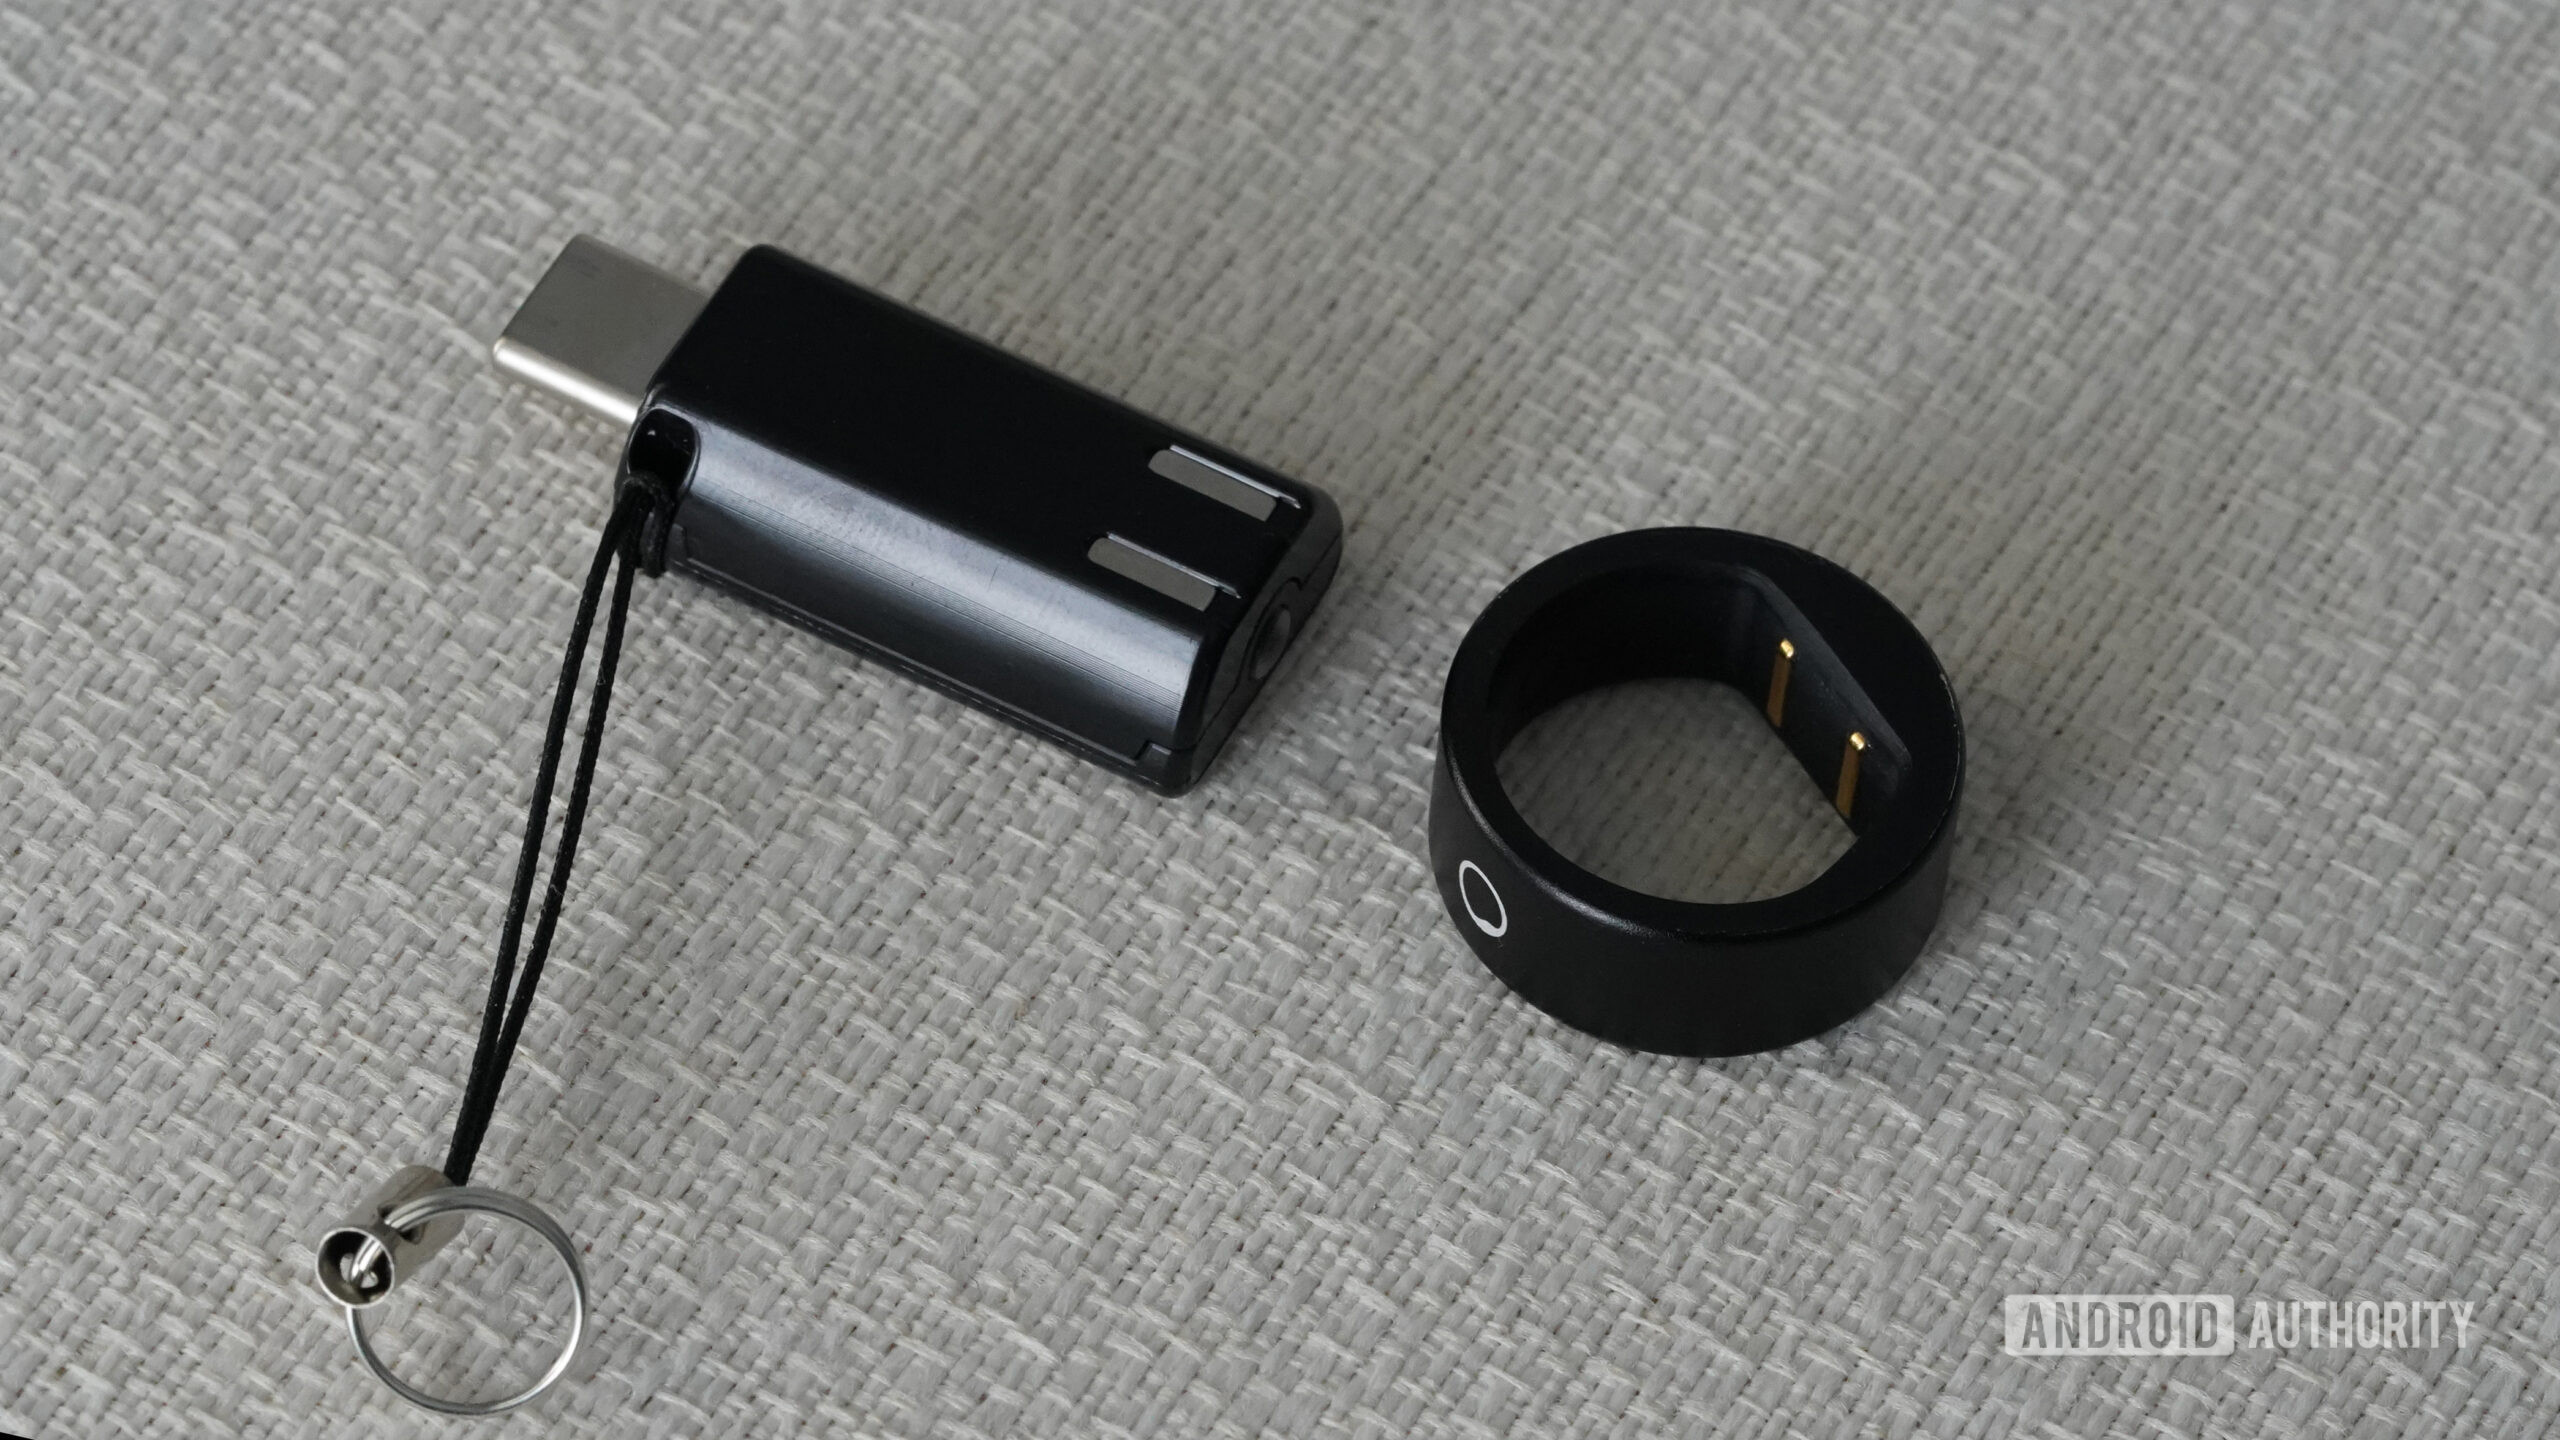 A Circular Ring Slim rests alongside its charger.